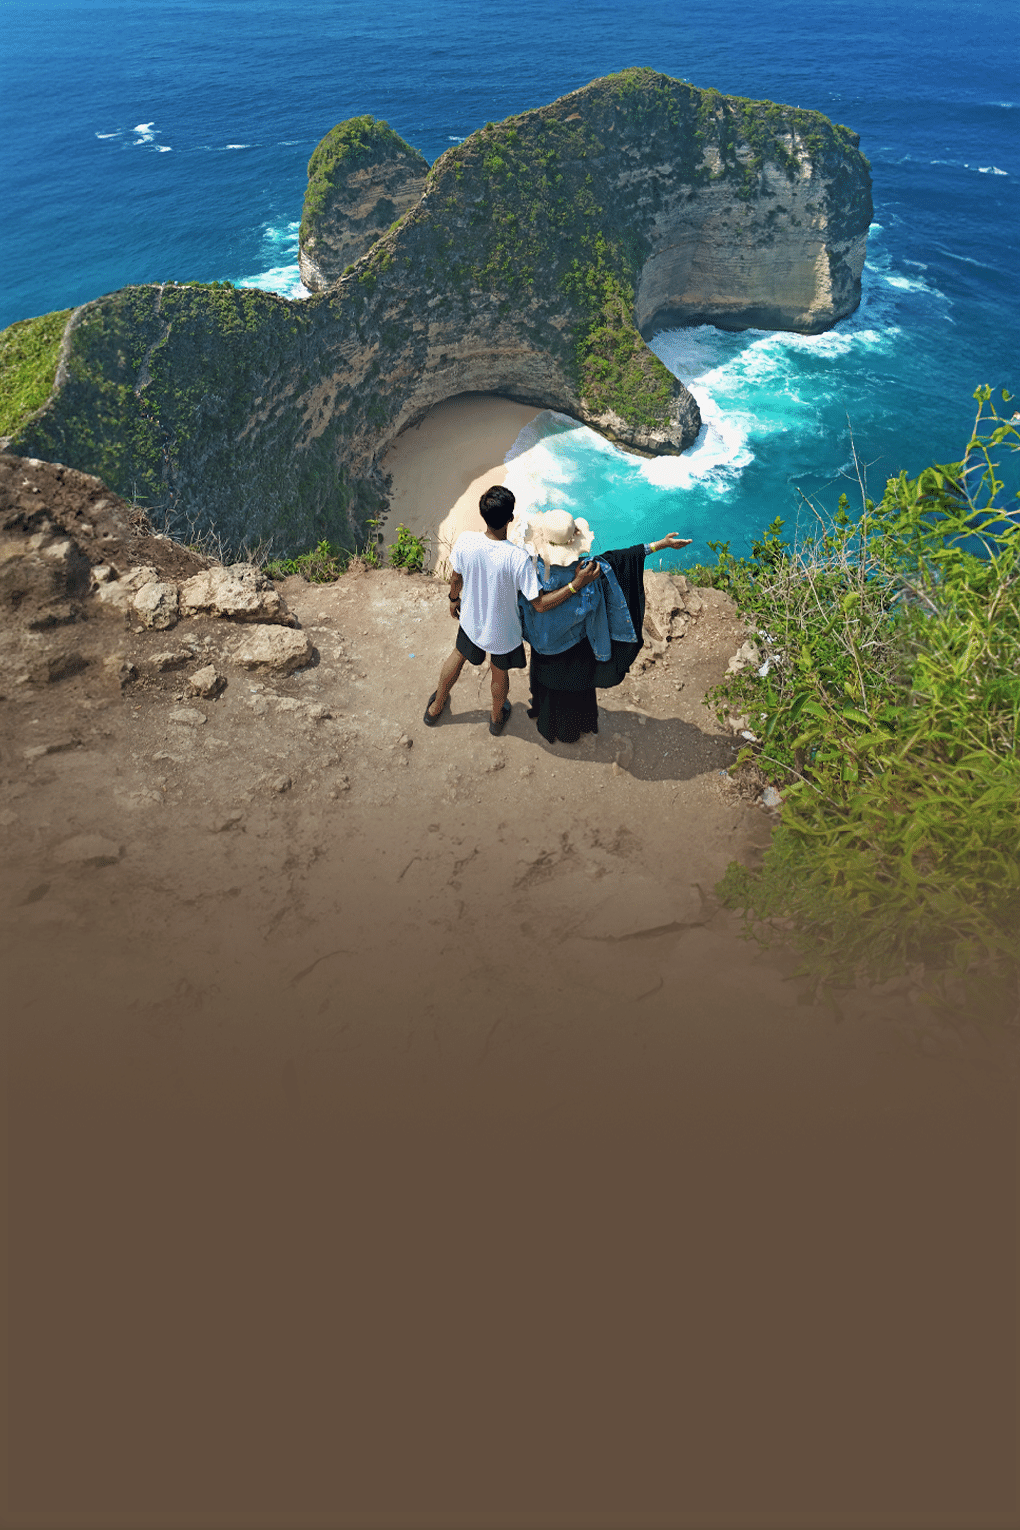 Bali Special Couple Package | FREE Excursion to Nusa Penida